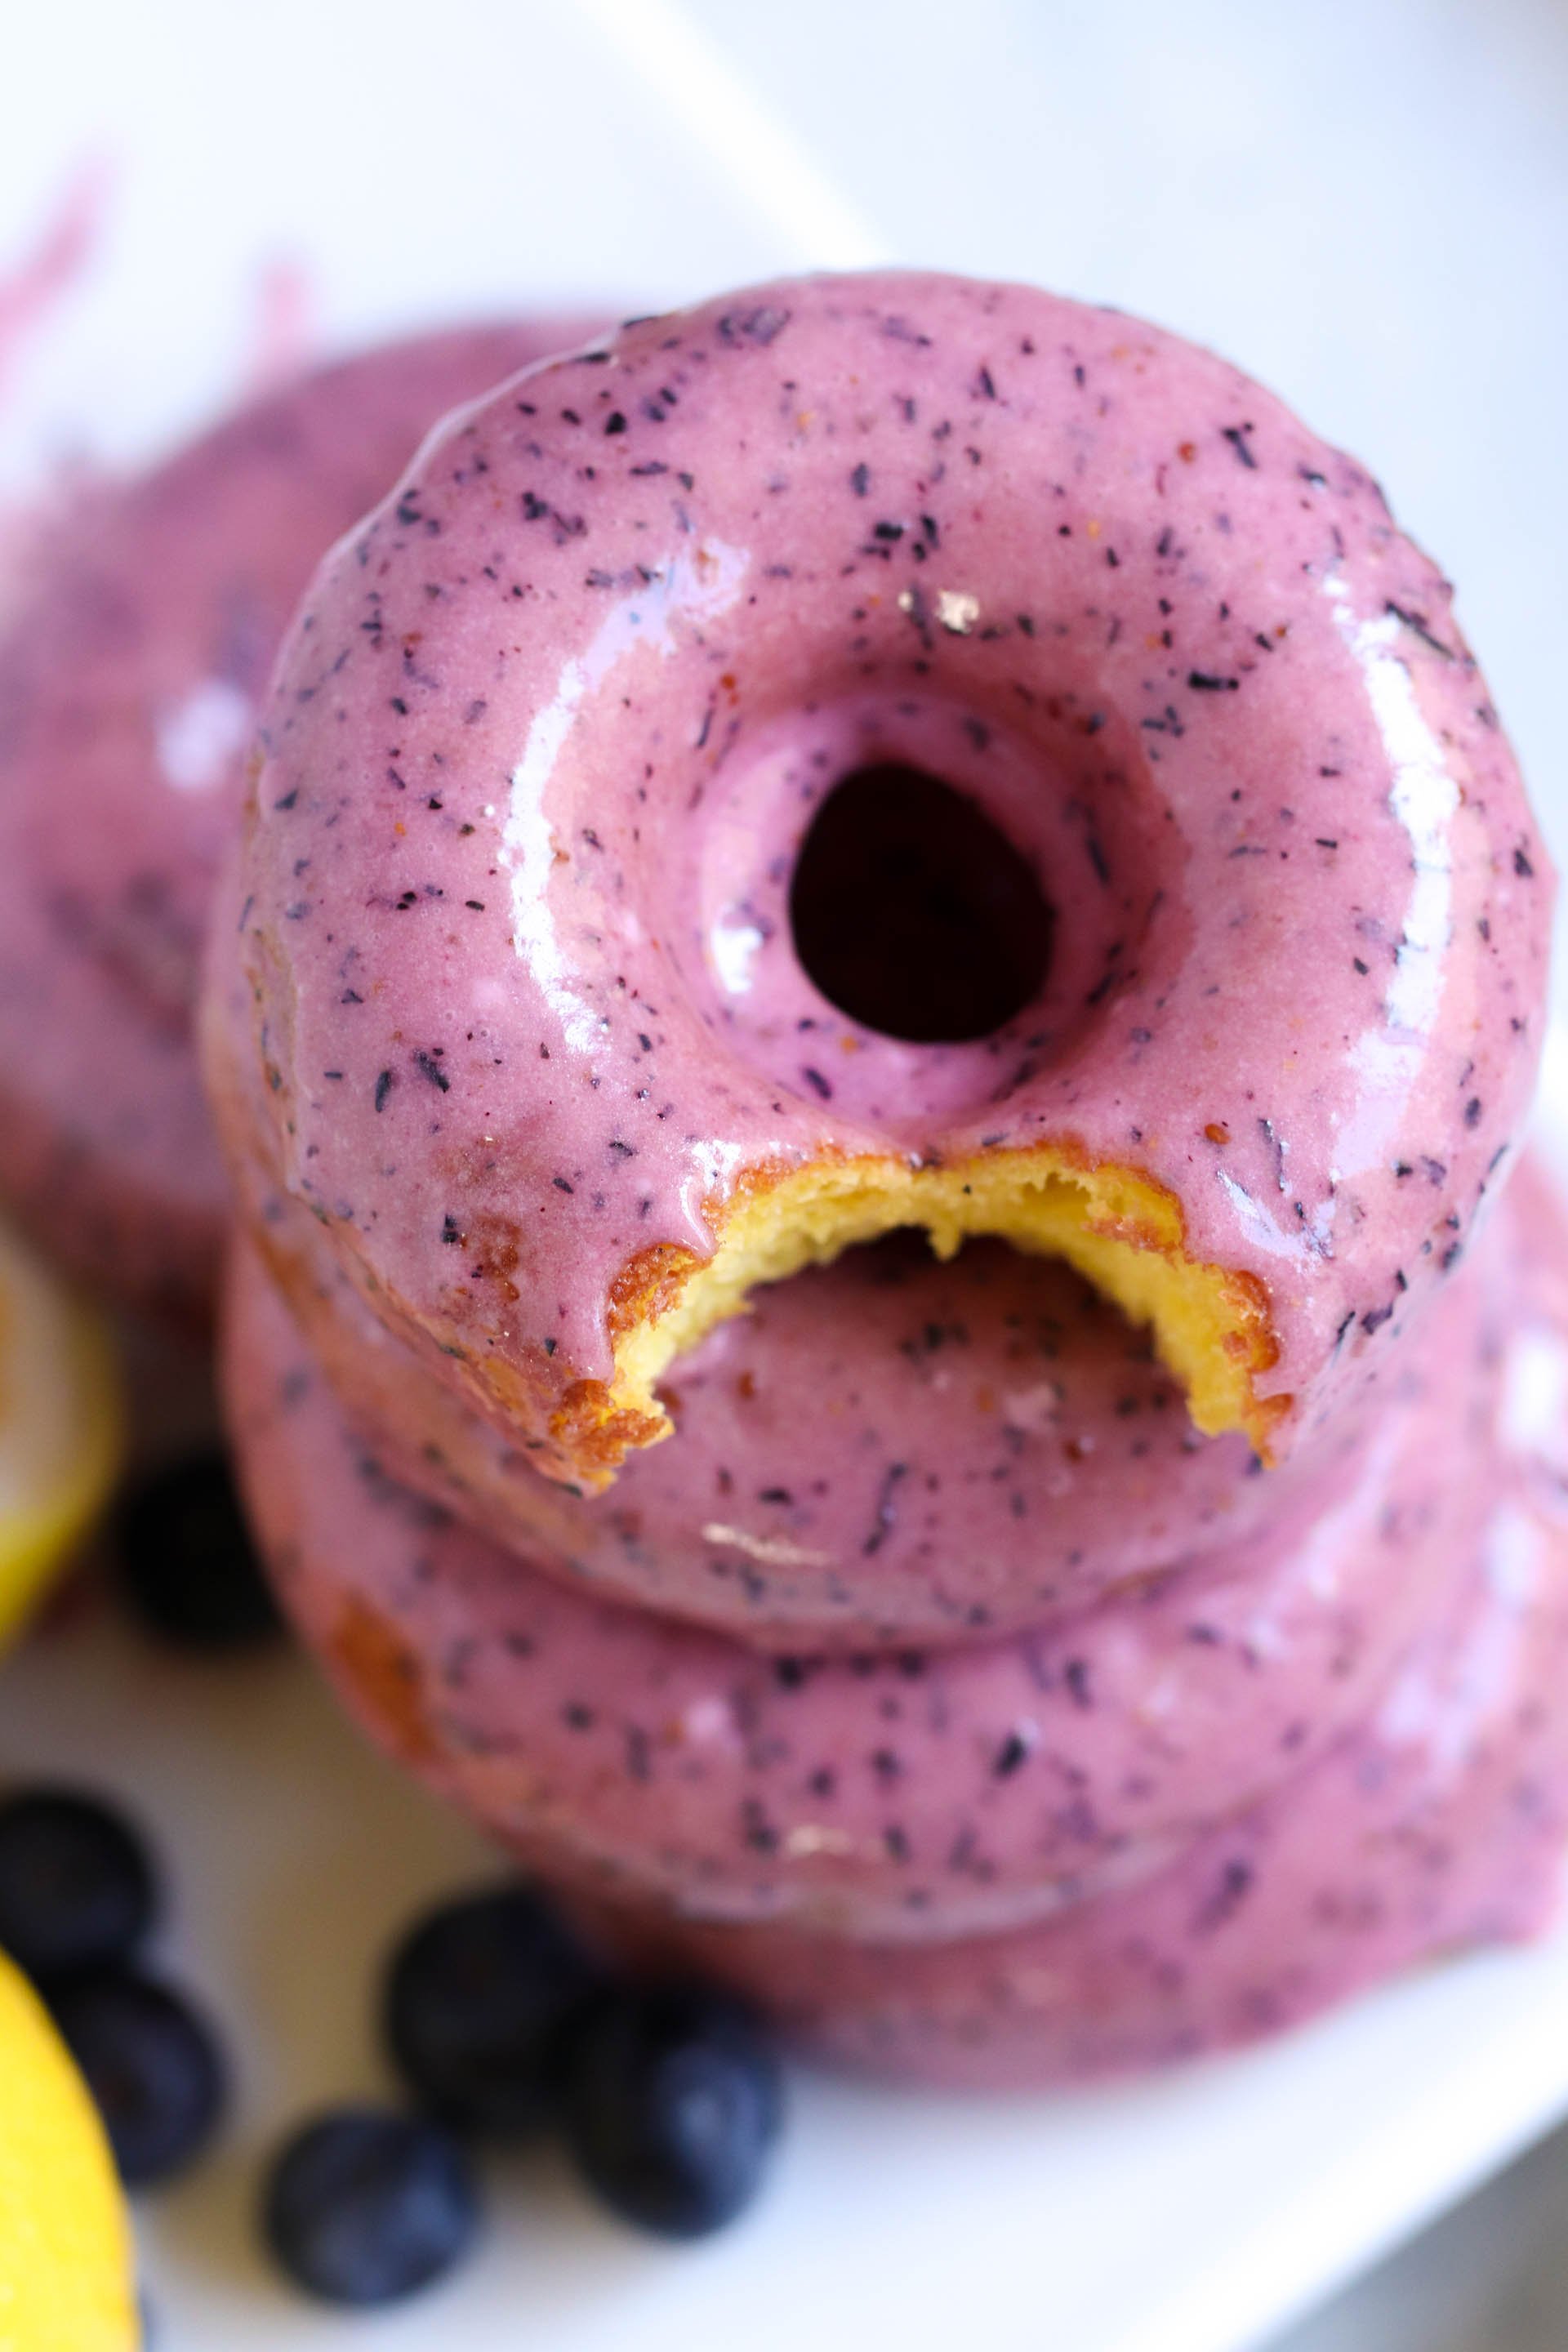 Lemon Donuts with Blueberry Frosting Recipe